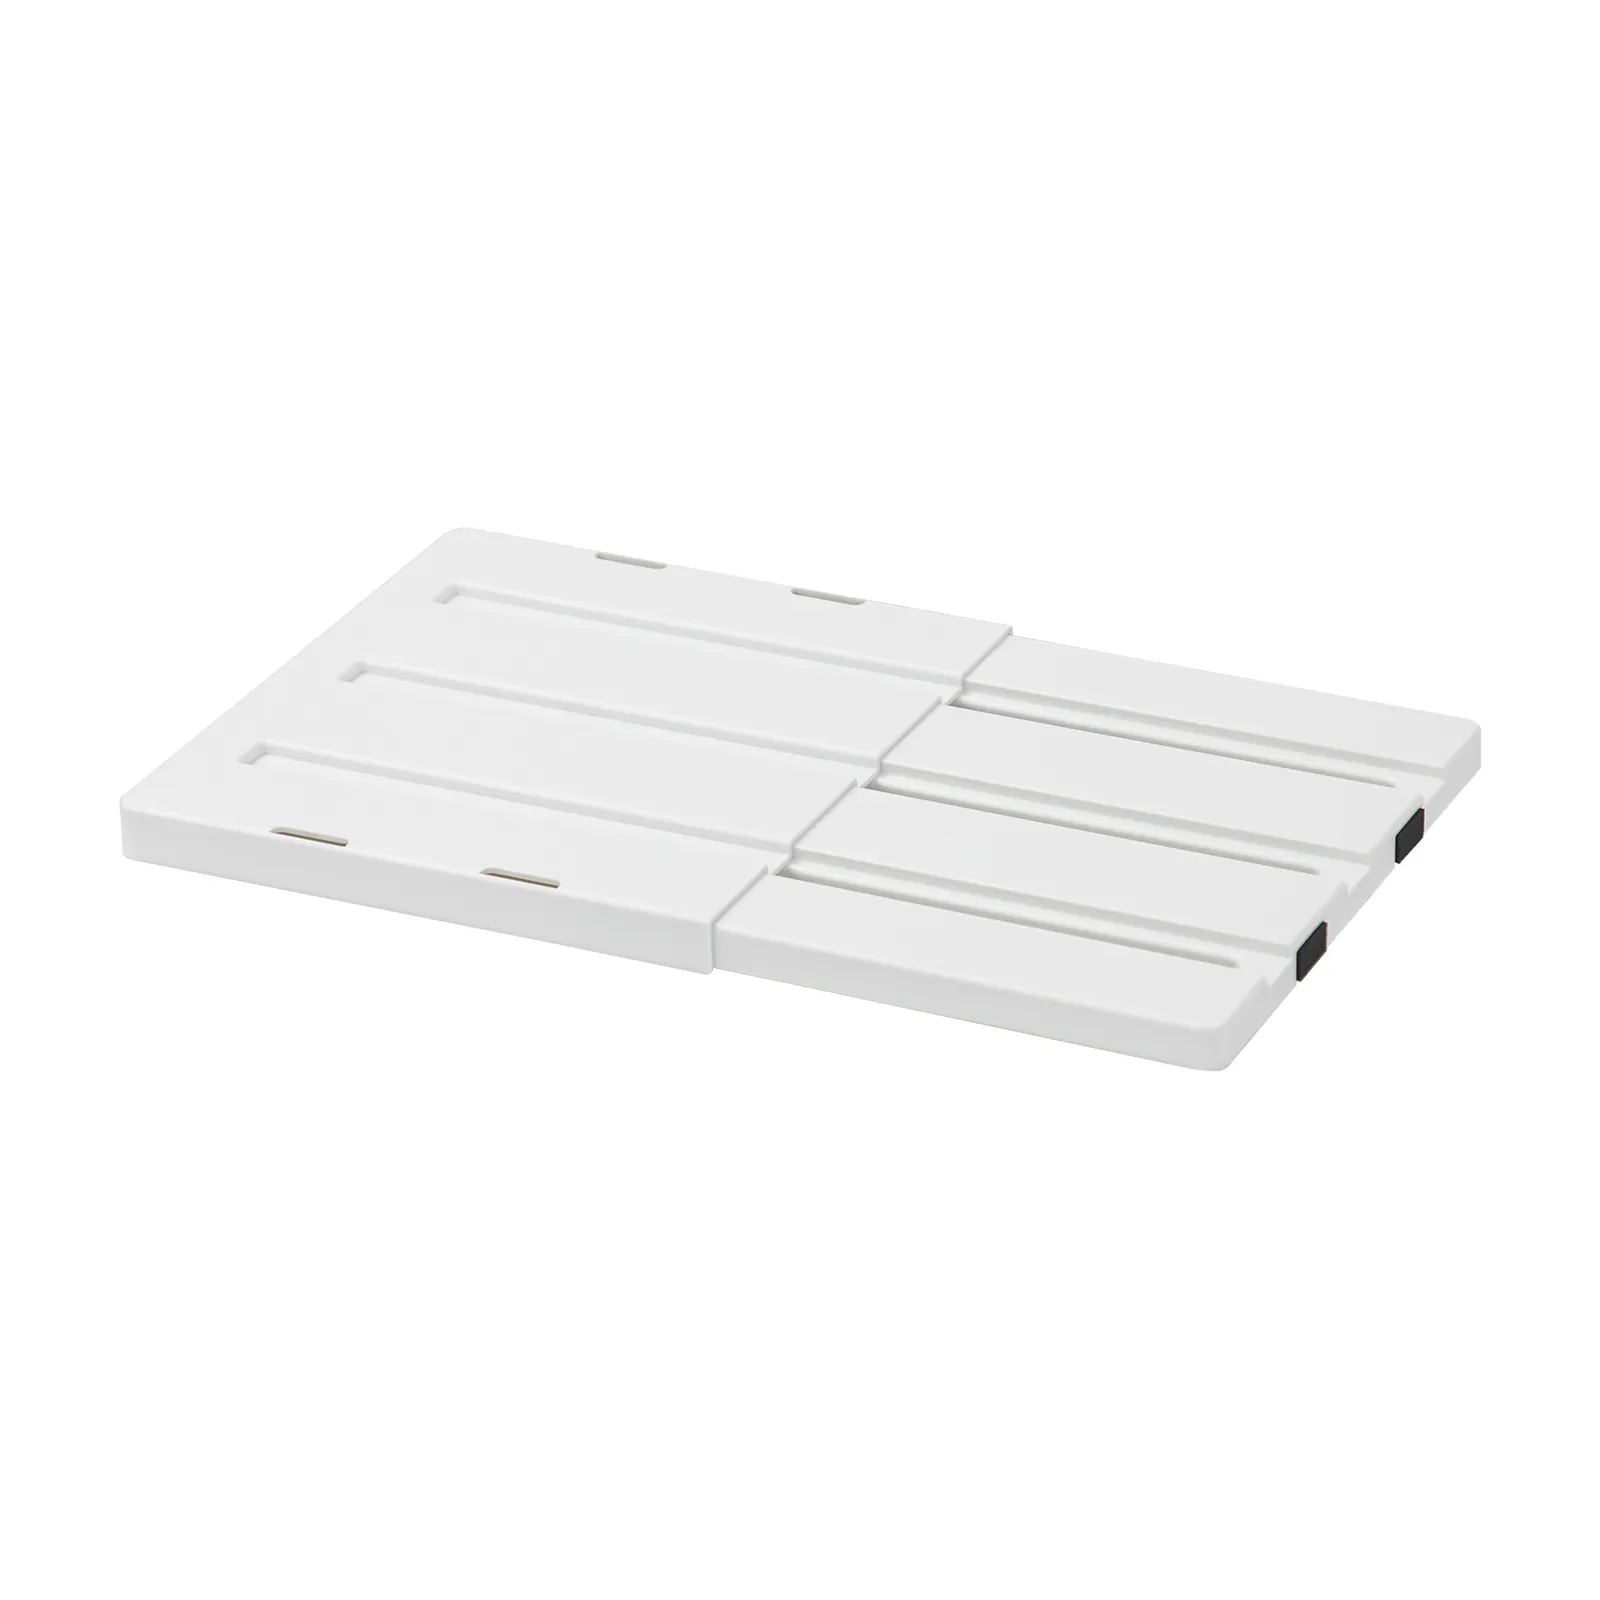 Adjust-A-Shelf Locker Shelf  Extends to Fit Your Locker  Easy to Use  Perfect for School  Office  Gym  Foldable 1  White 